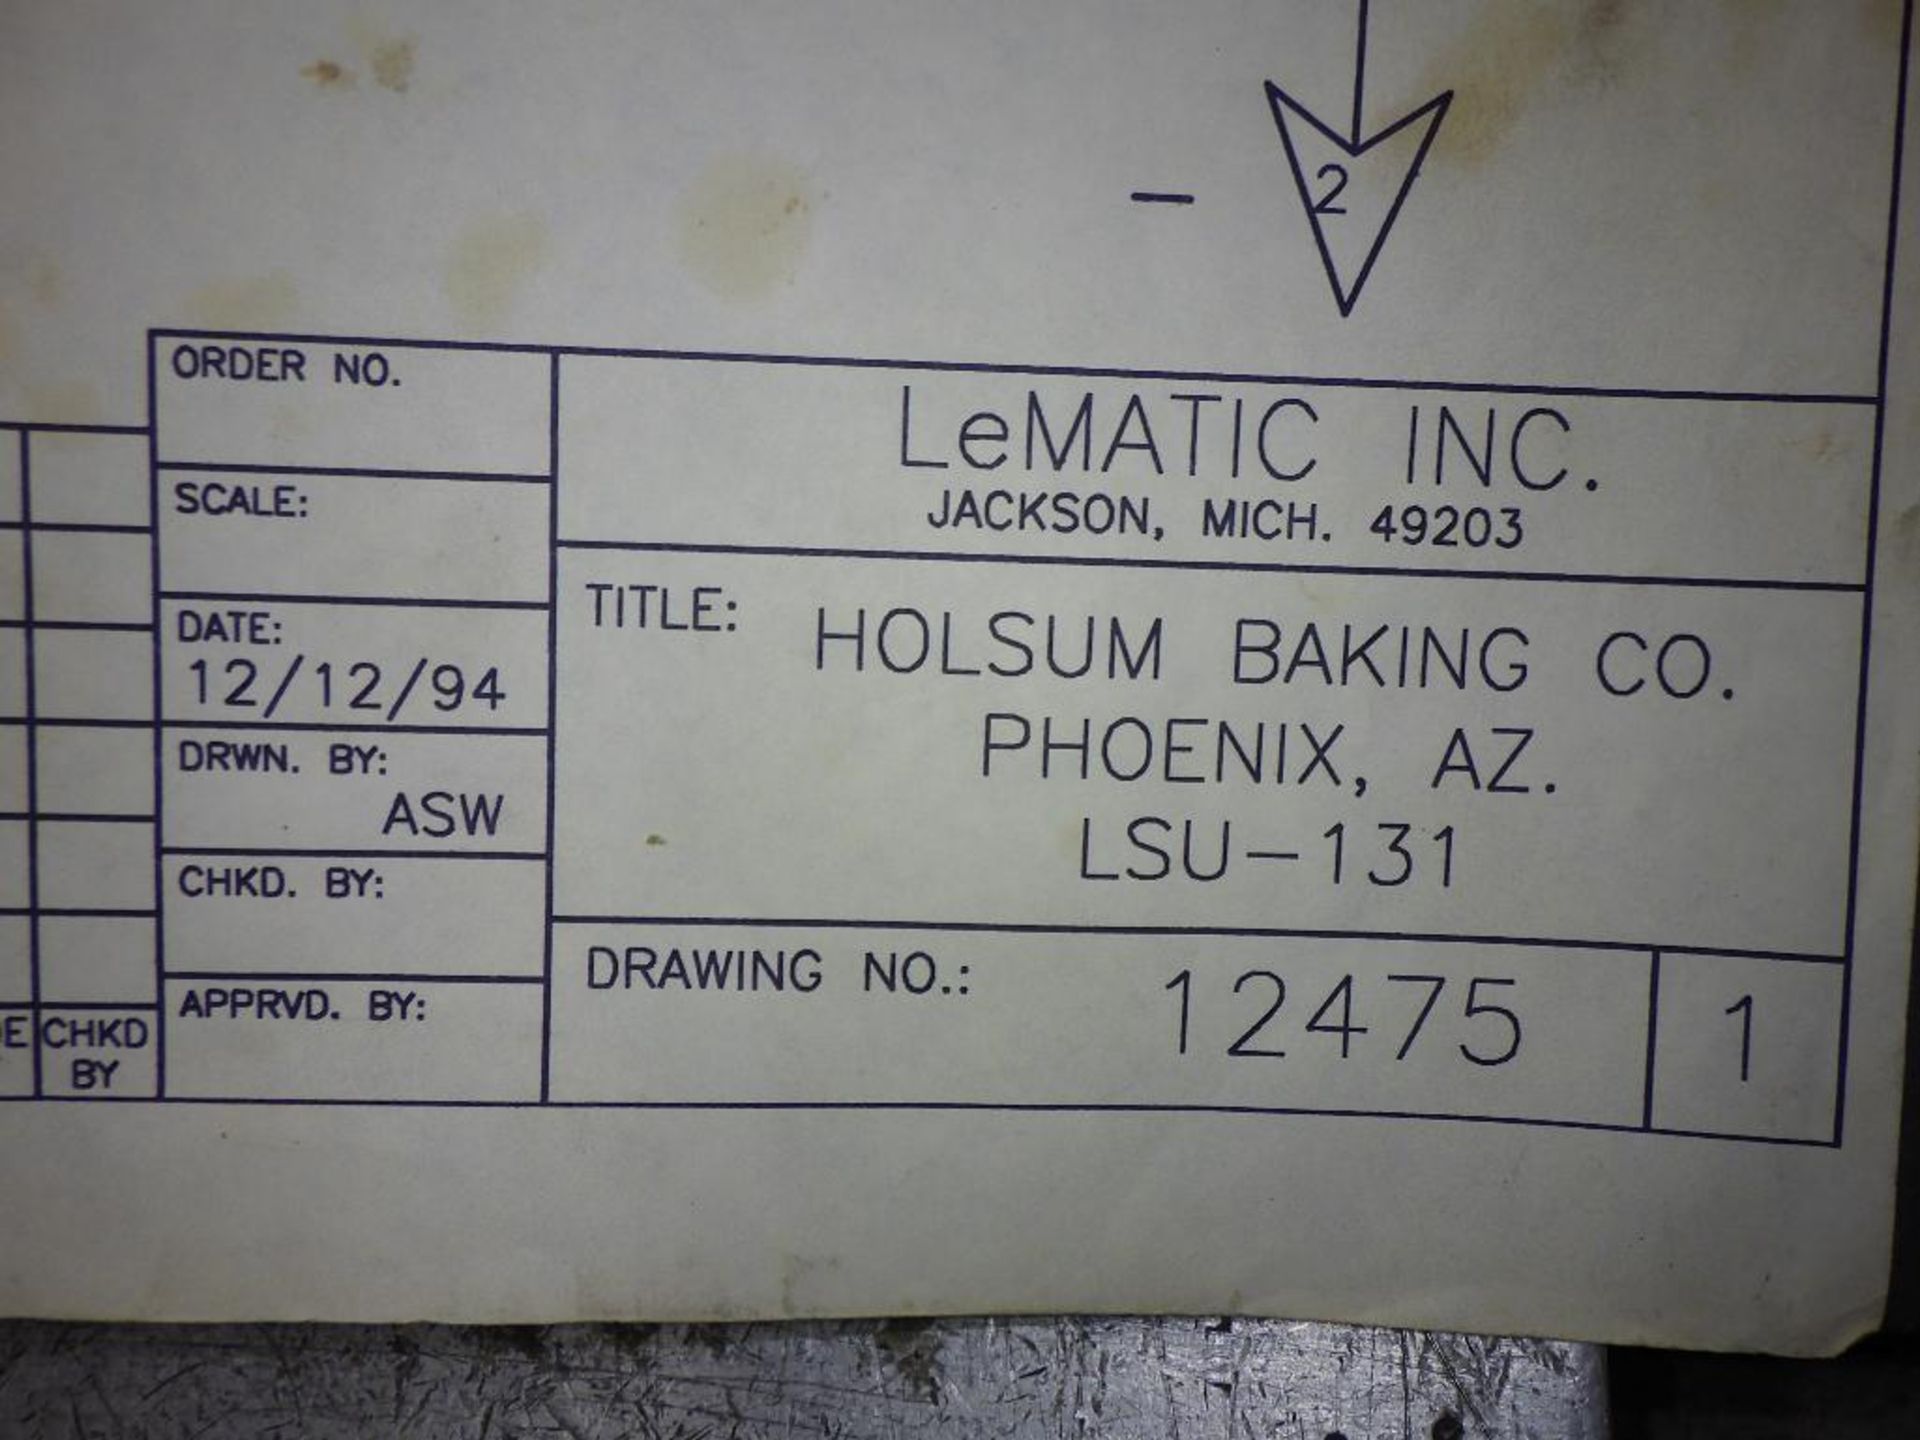 Lematic slicing and bulk packing system - Image 45 of 70